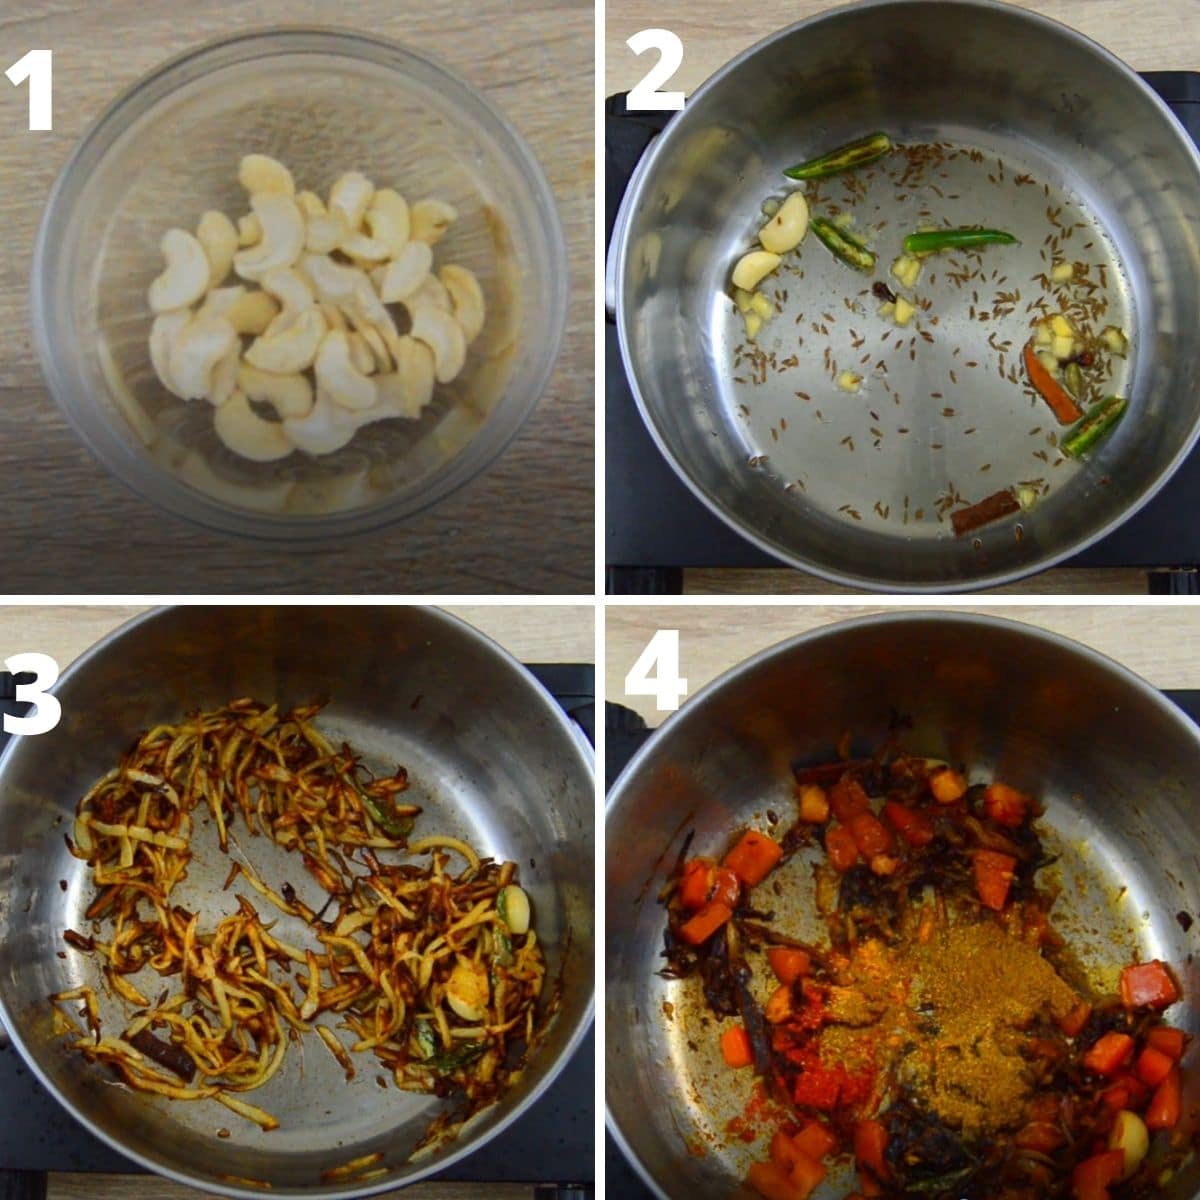 college of 4 images with top left image with a bowl of soaked cashews and rest of the 3 images showing the process of cooking vegetables and spices in a steel pot.